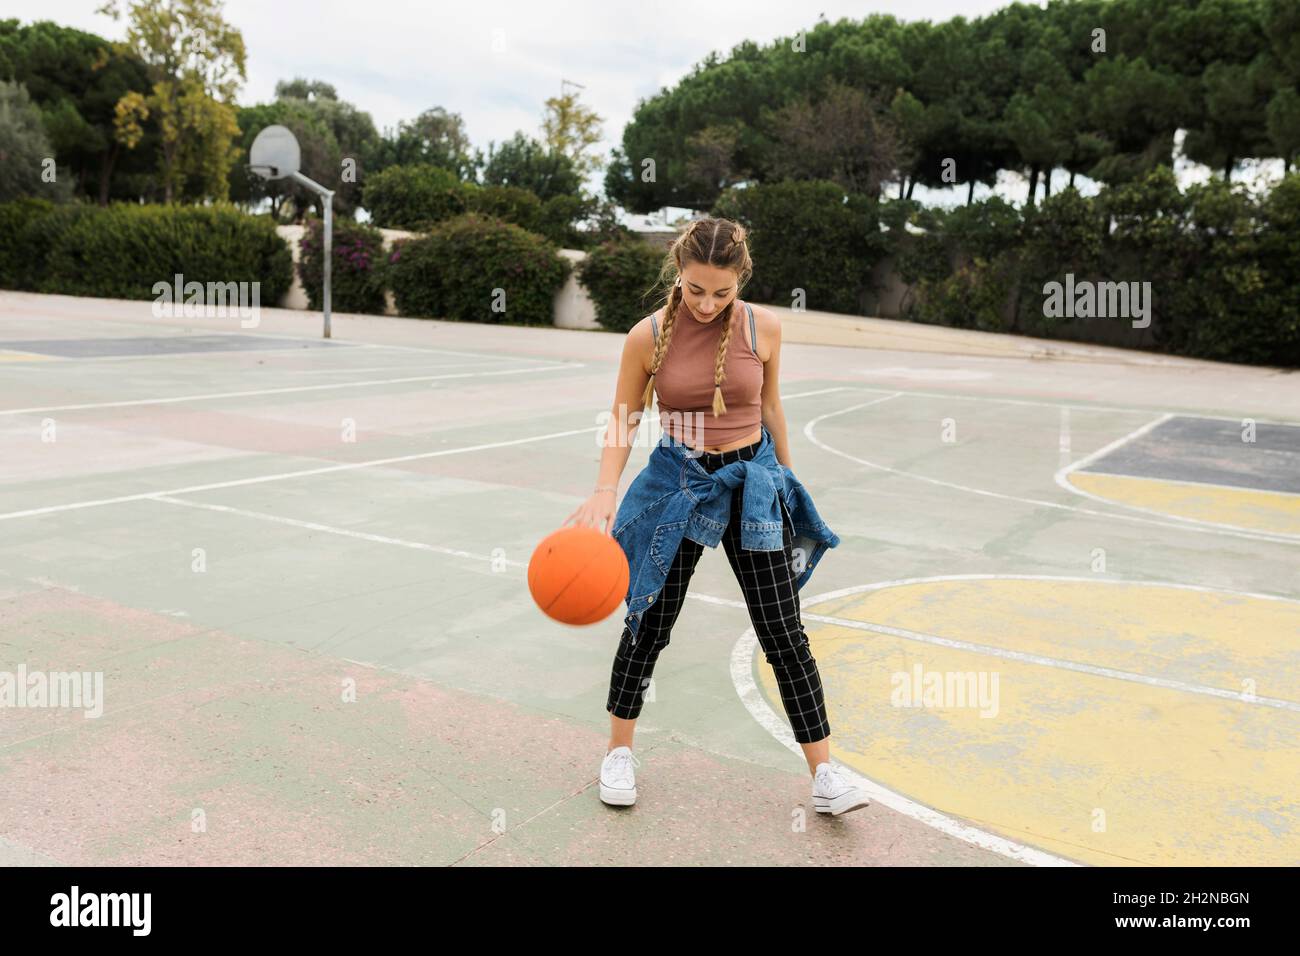 Woman playing with basketball at sports court Stock Photo